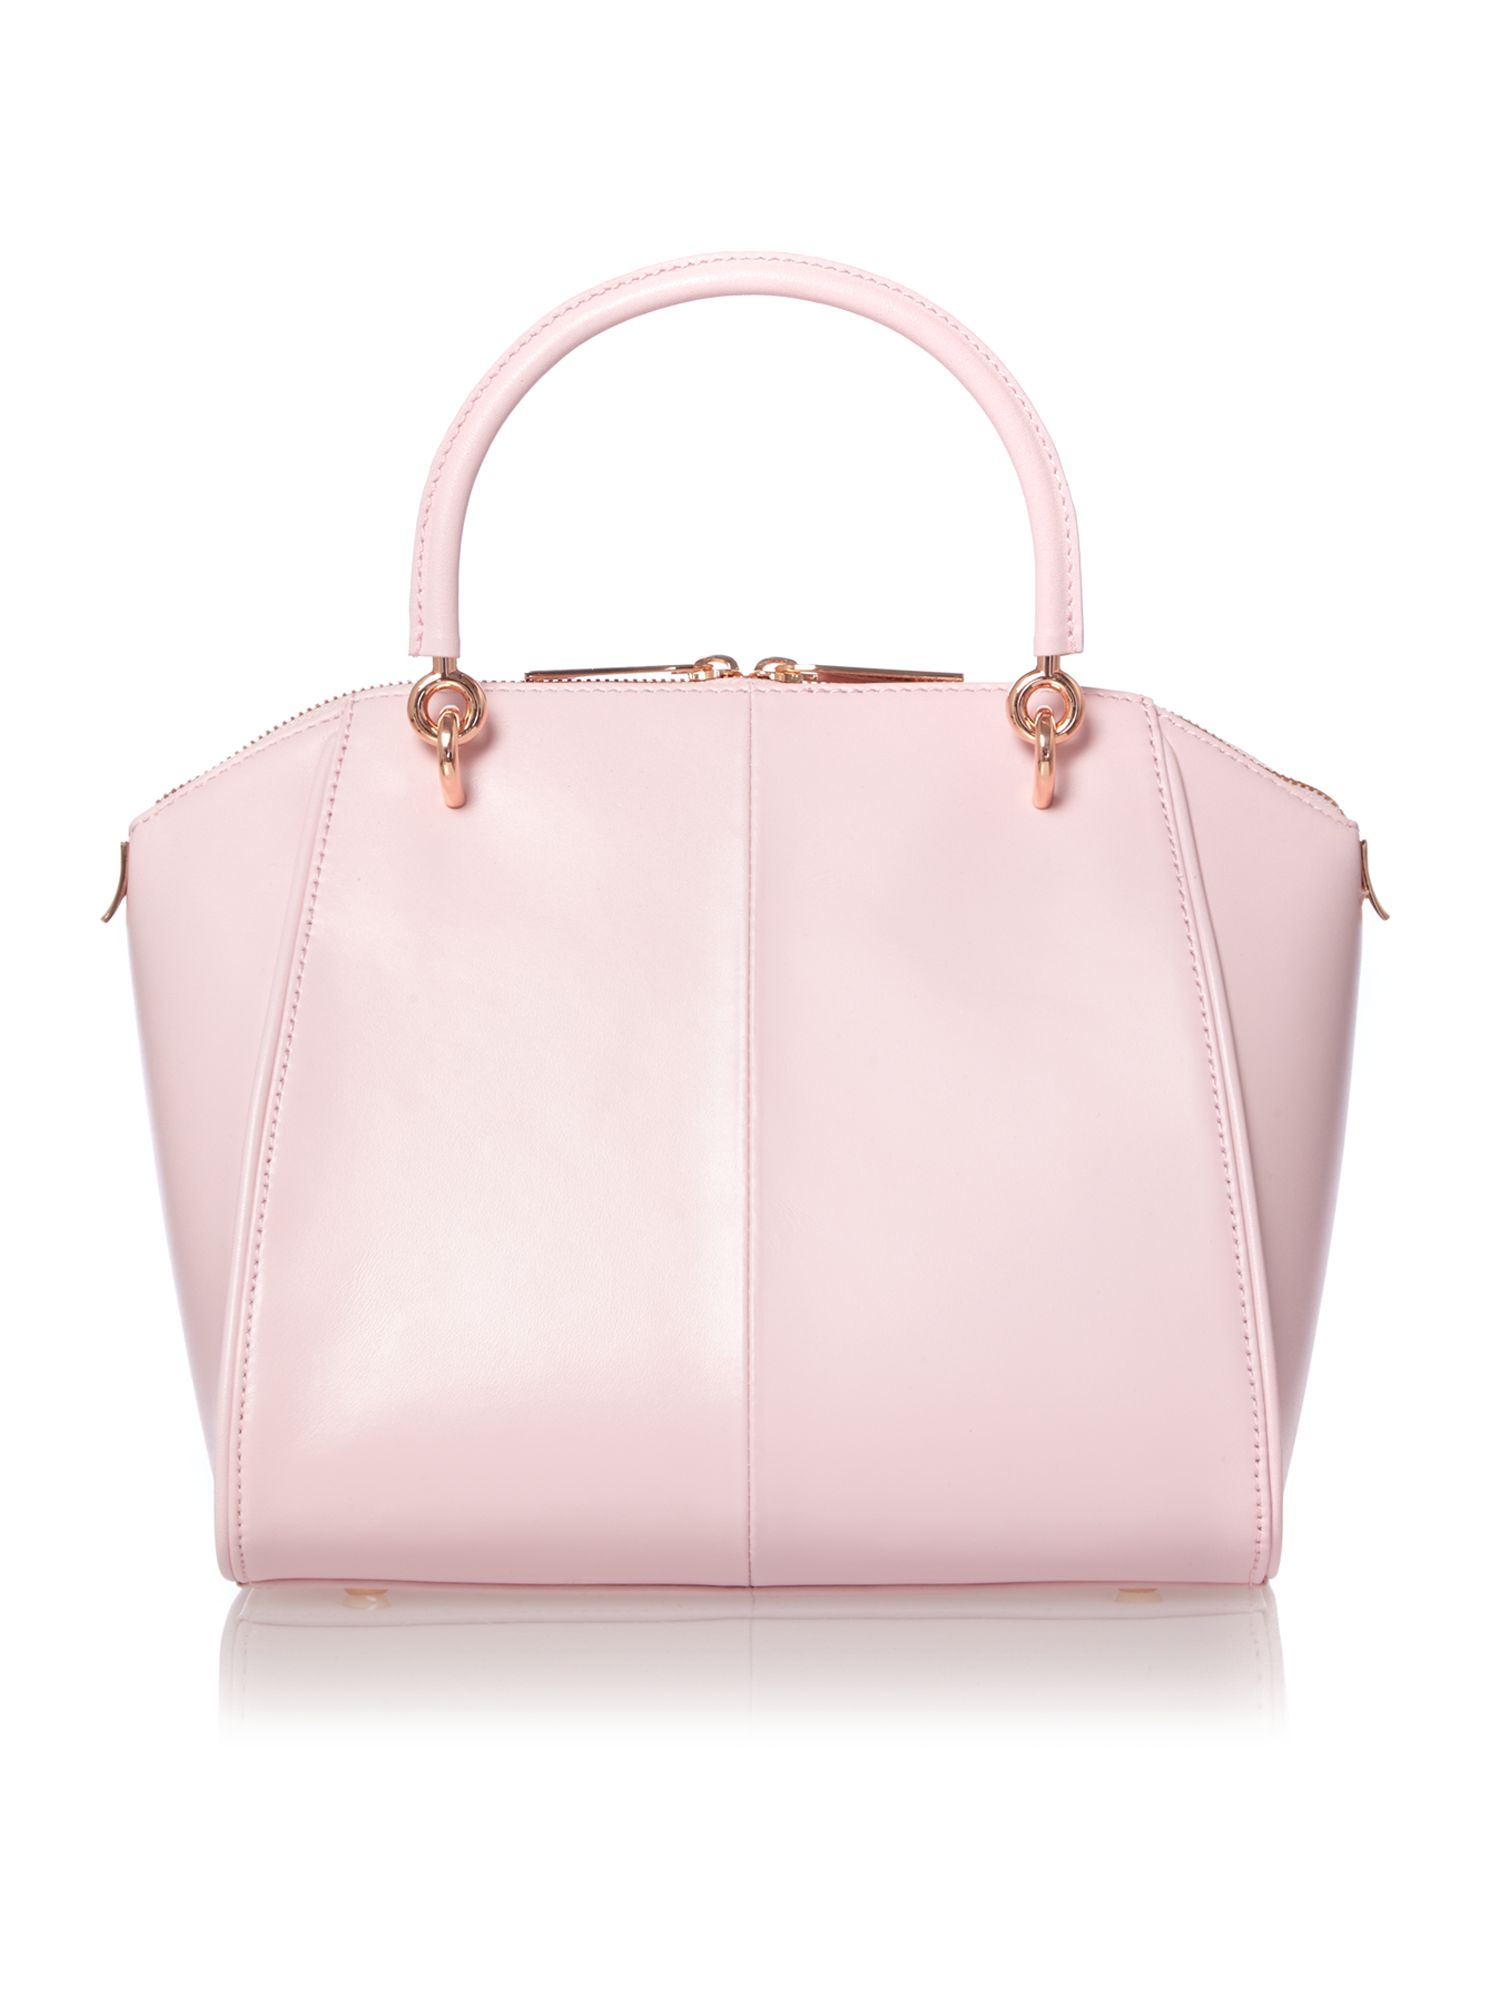 Ted Baker Pale Pink Small Metal Bow Leather Tote Bag - Lyst